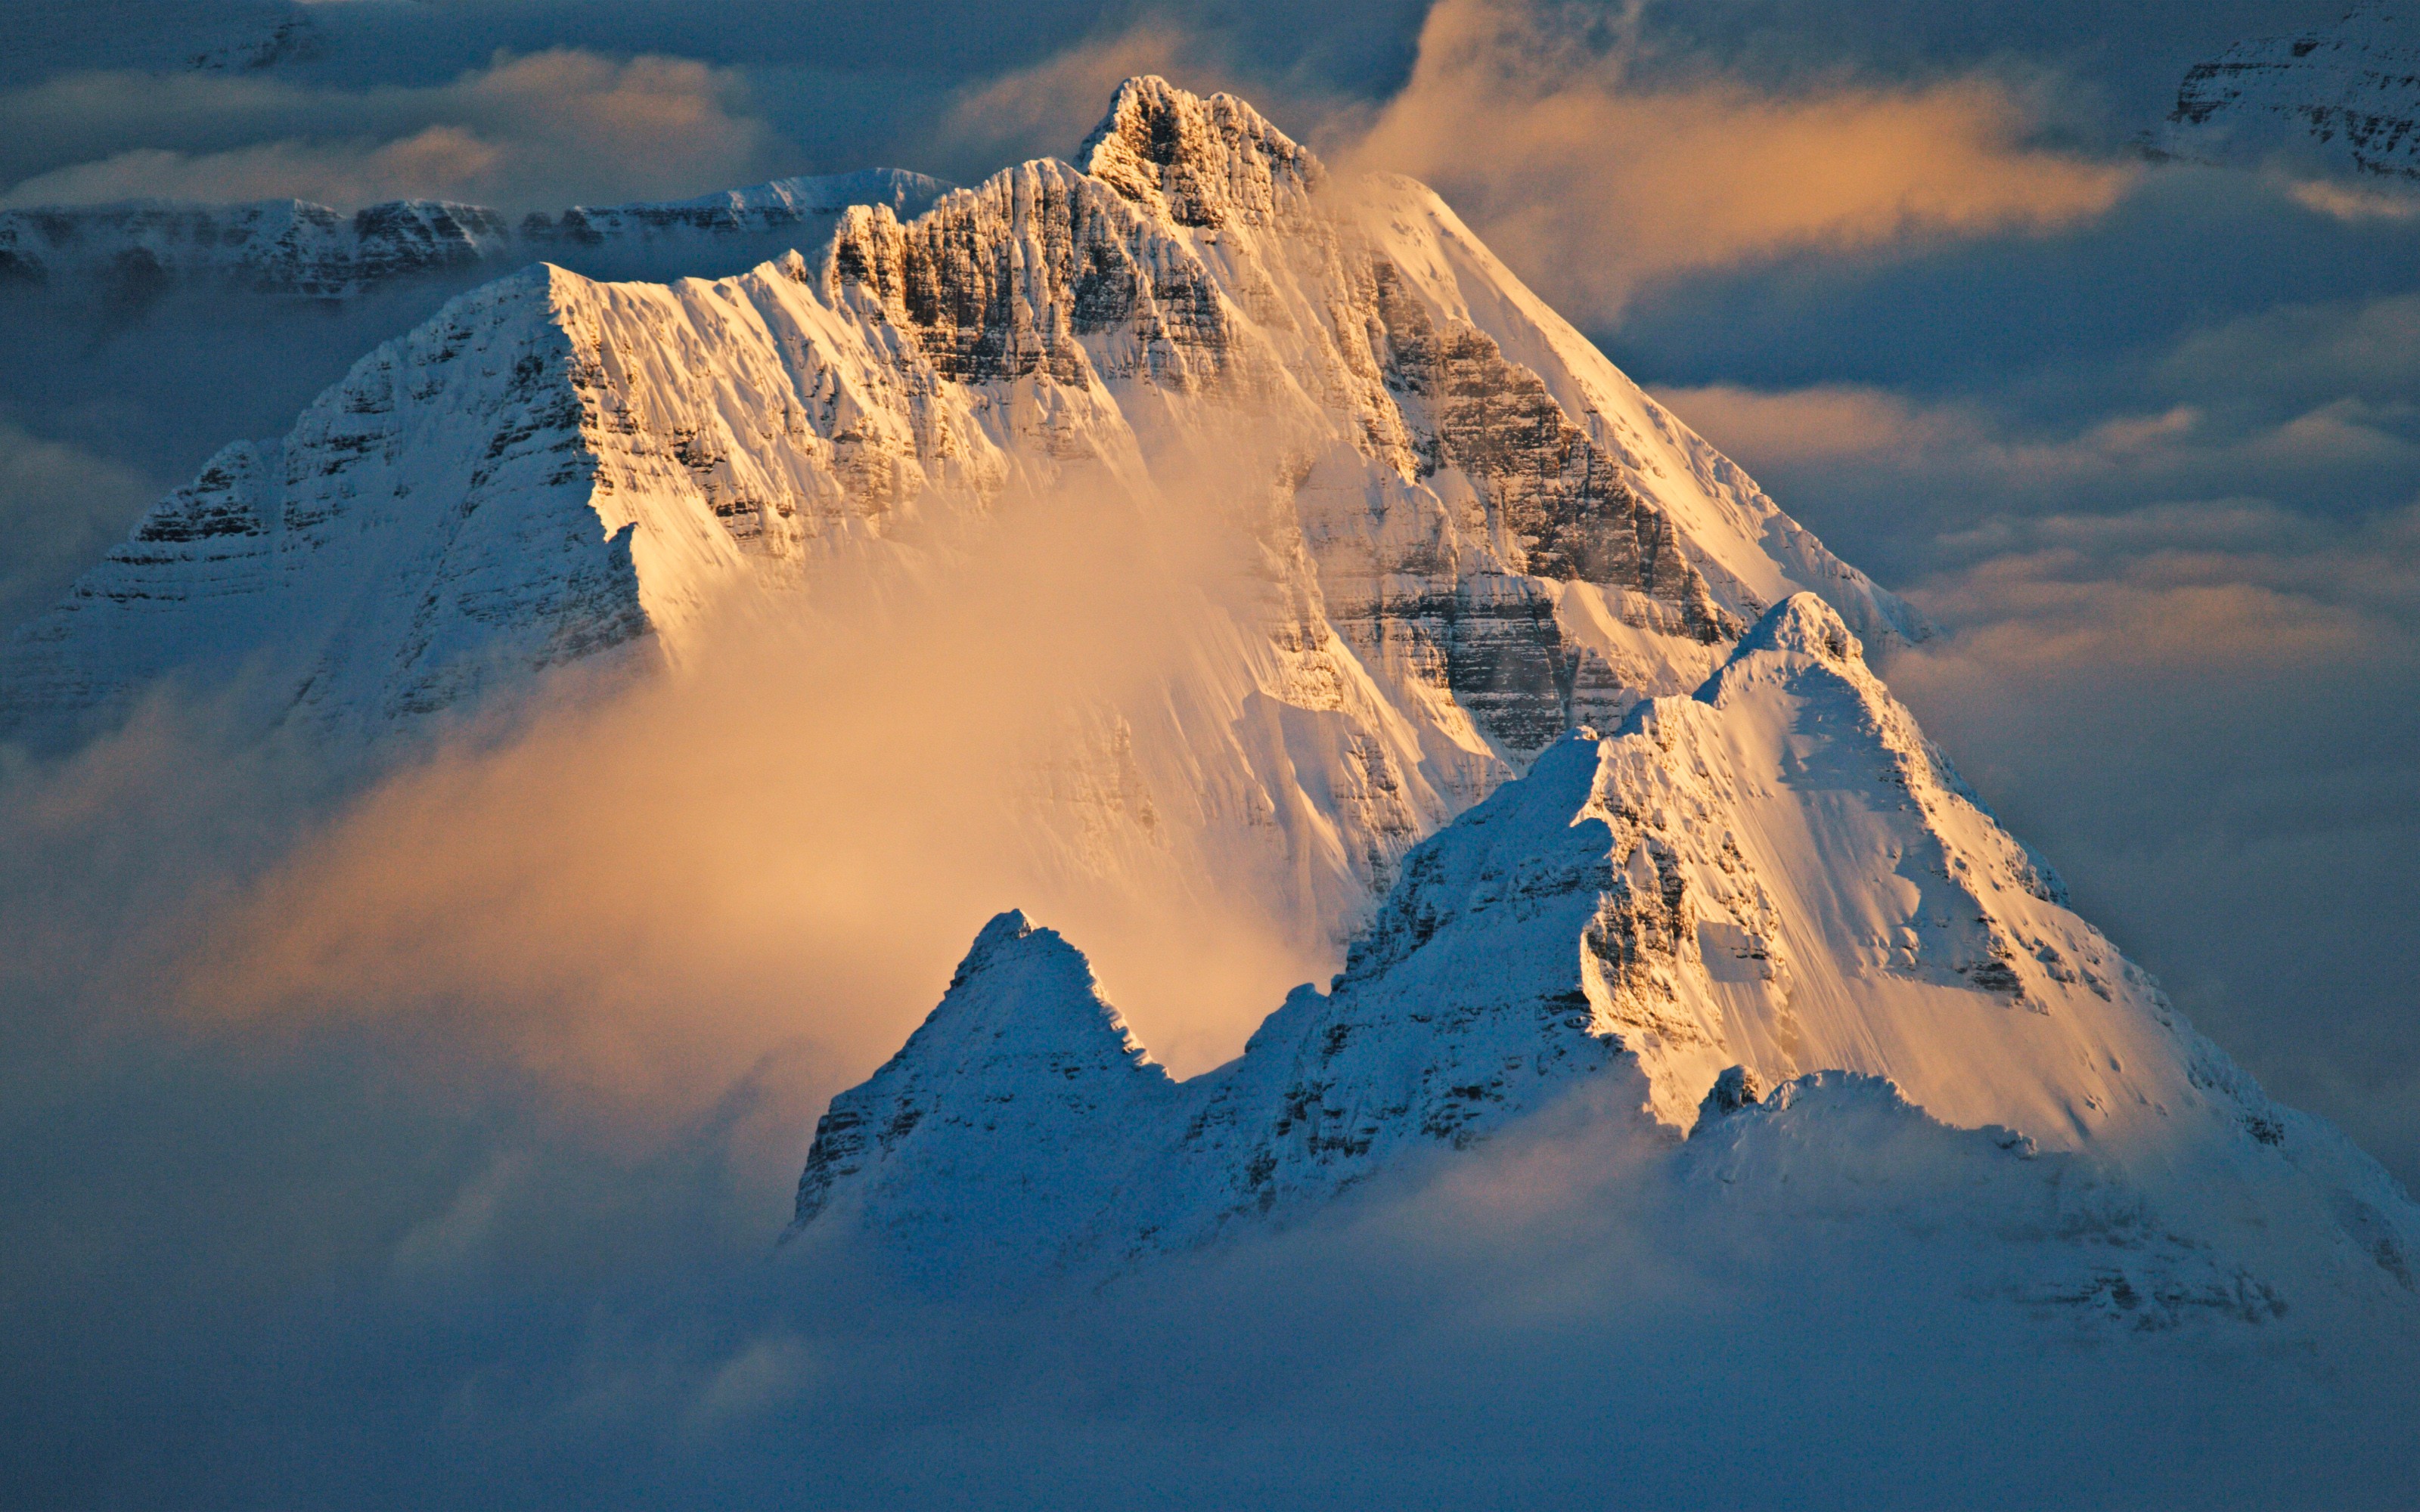 General 3200x2000 landscape mountains snowy peak clouds National Geographic nature cold ice snow snowy mountain